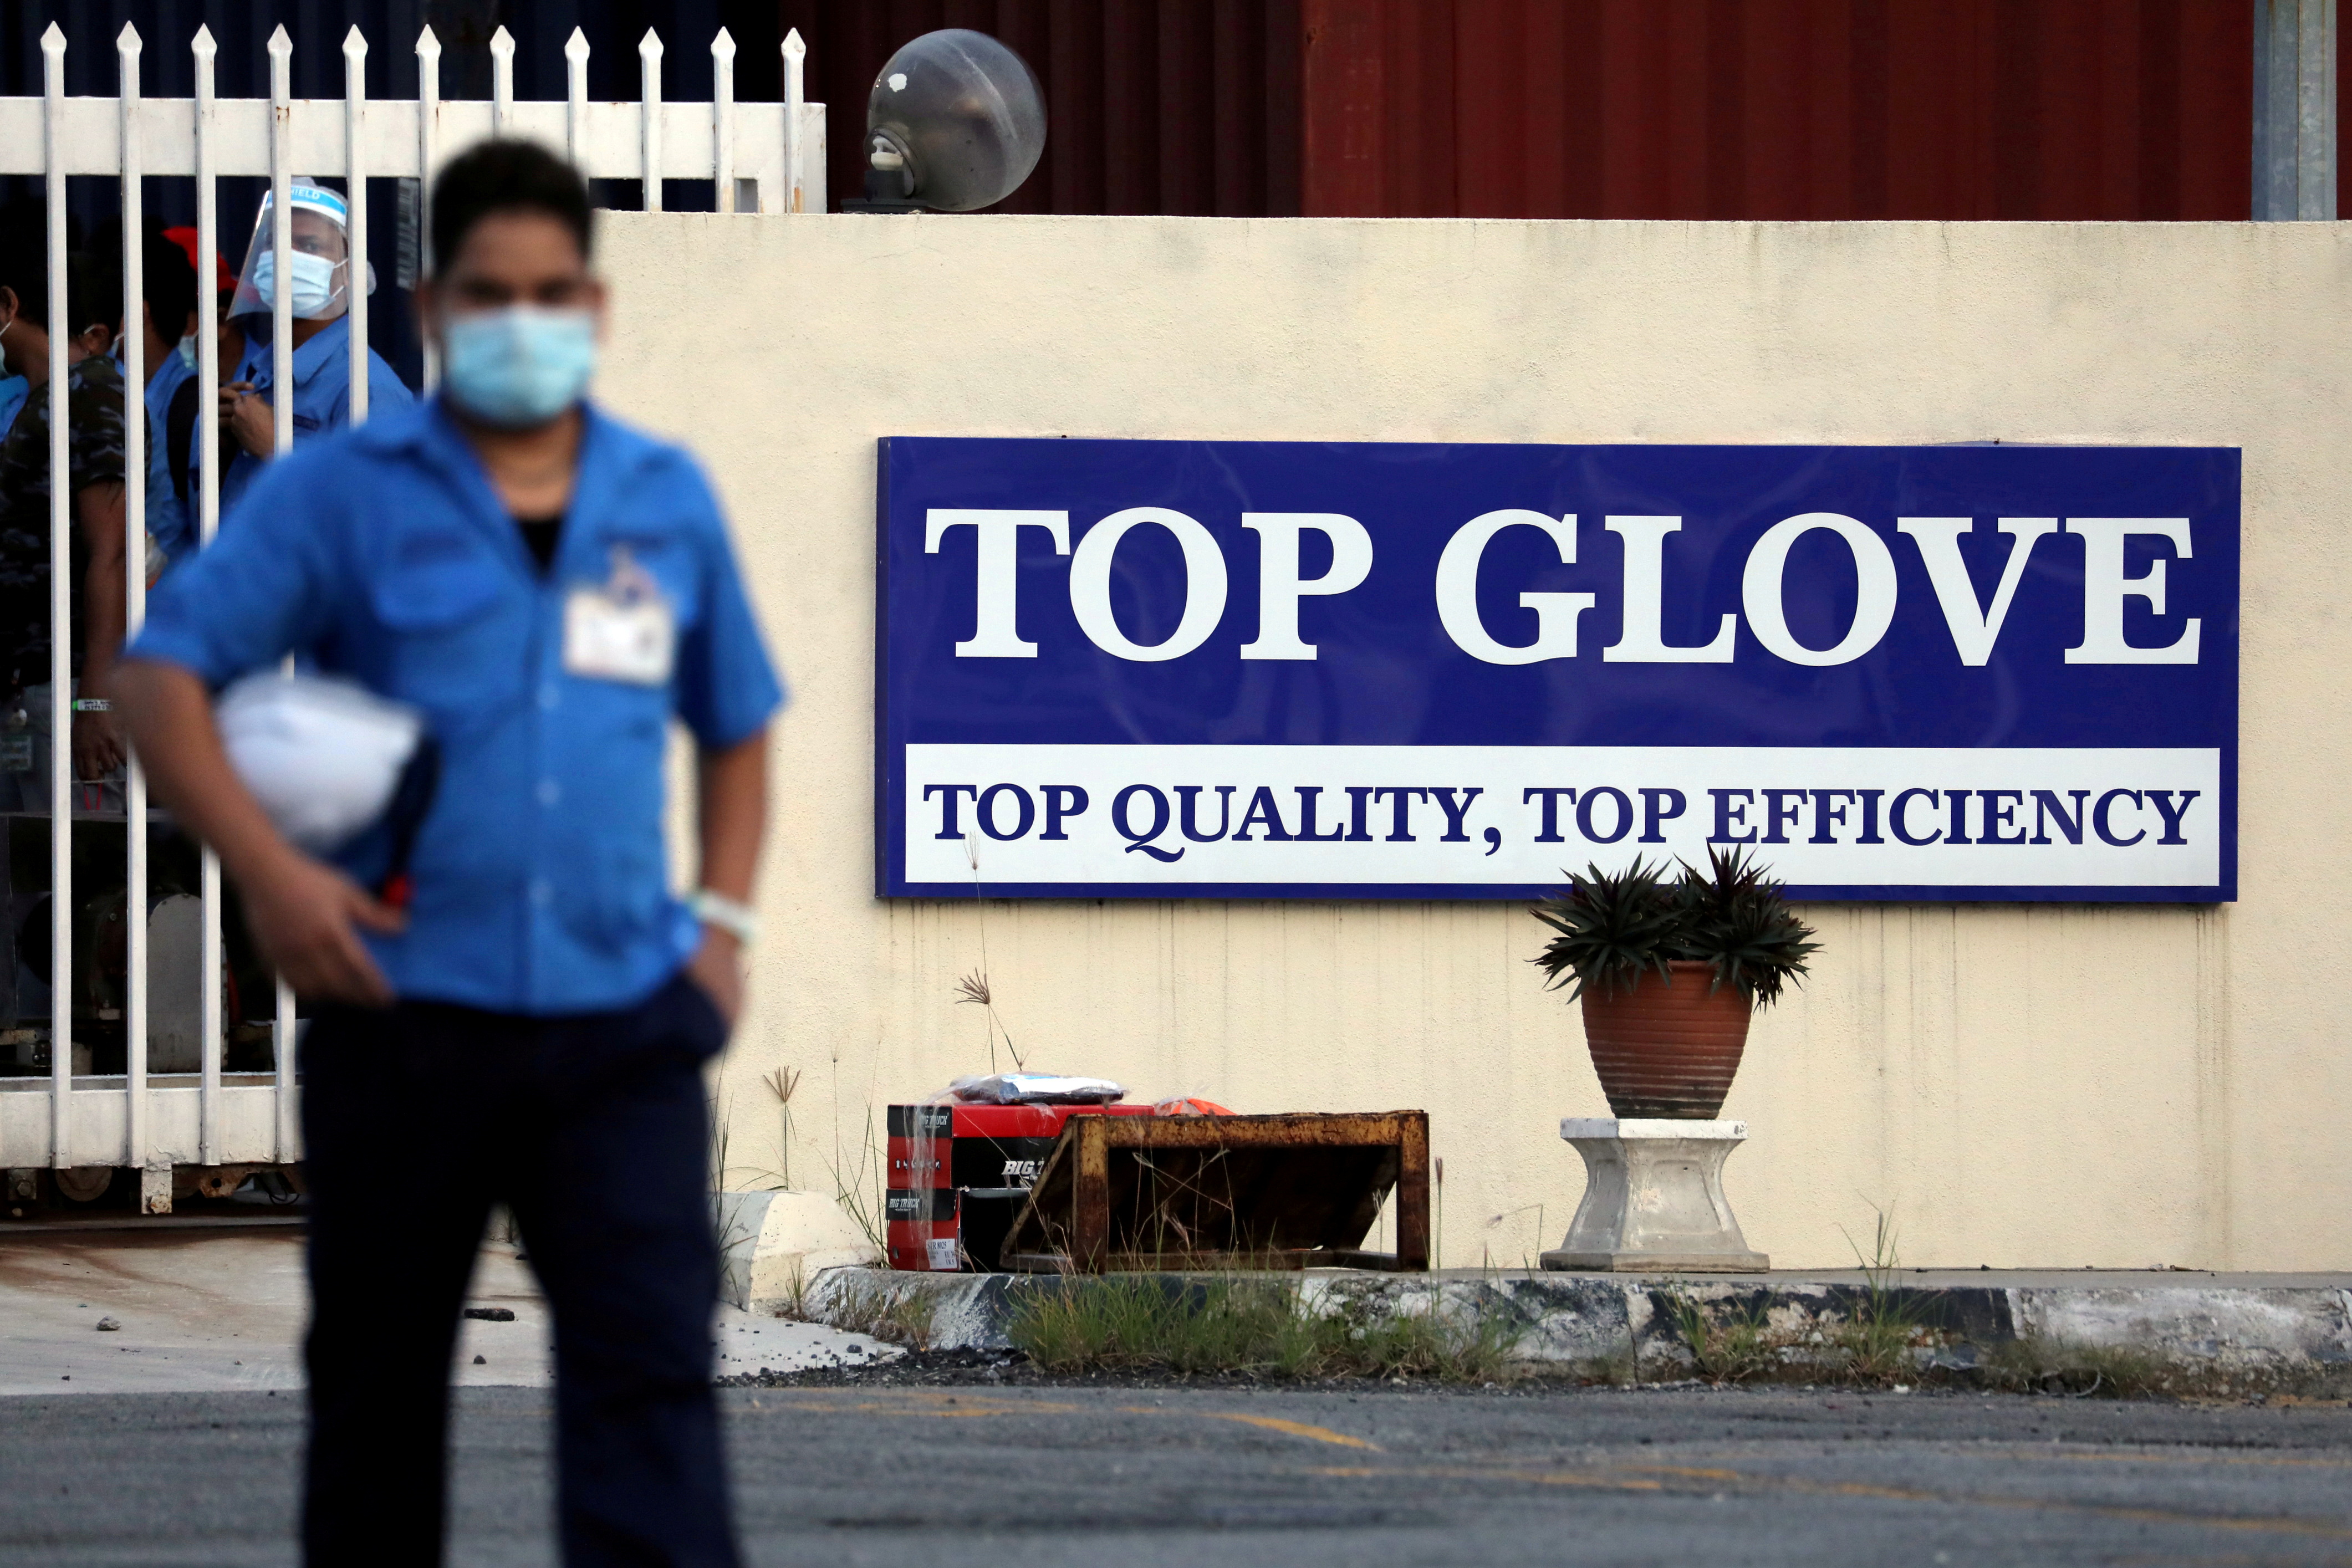 A worker leaves a Top Glove factory after his shift in Klang, Malaysia